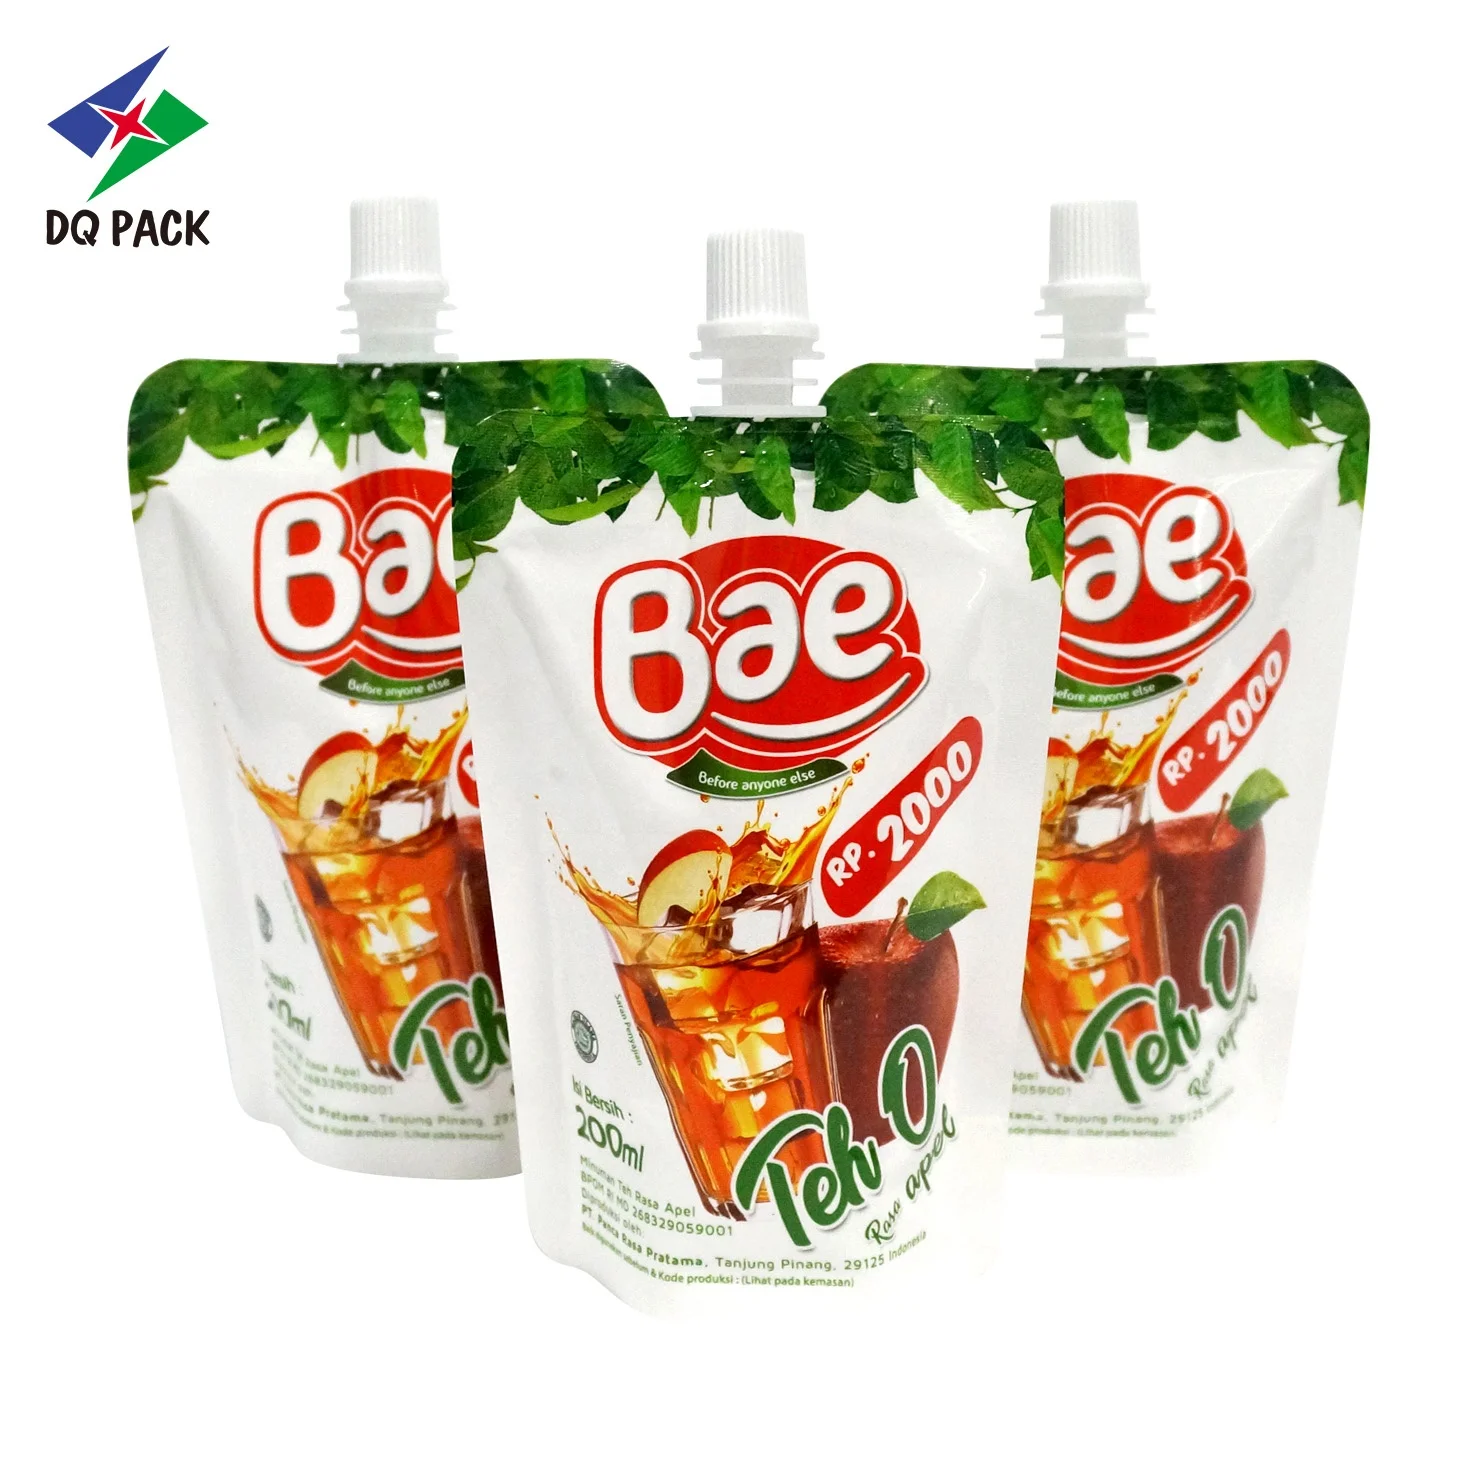 DQ PACK costom Logo Printed Stand up pouch with spout for beverages packaging pouch